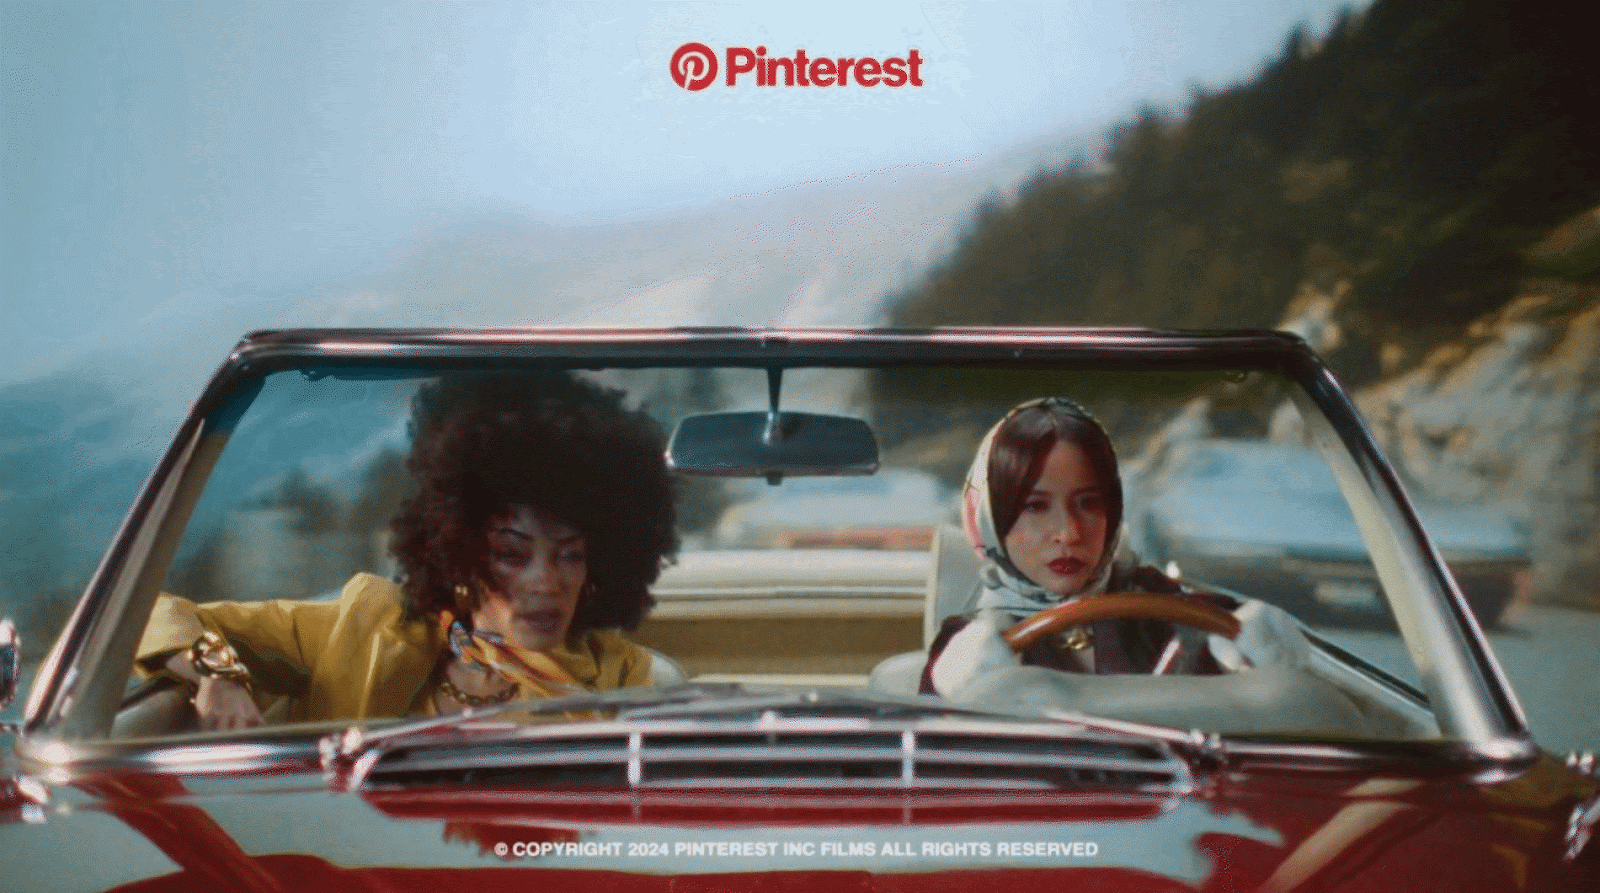 Pinterest targets advertisers in new ‘P for Performance’ campaign